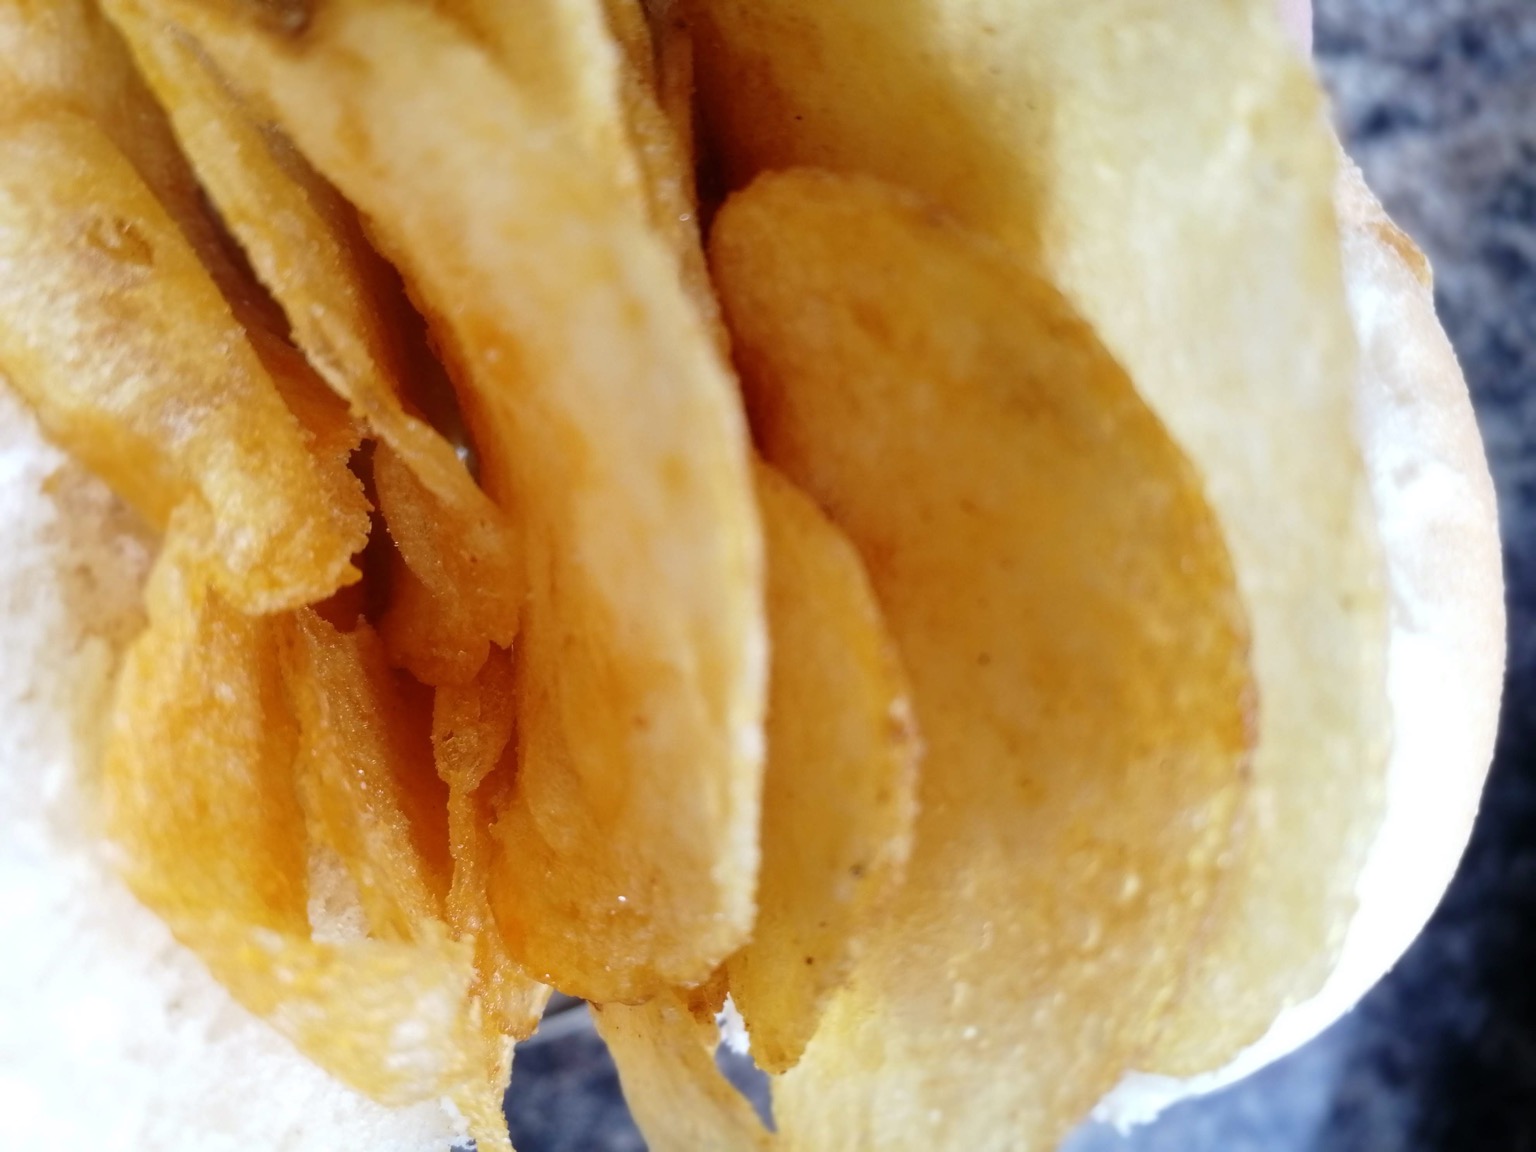 Extreme close up of white roll containing crisps